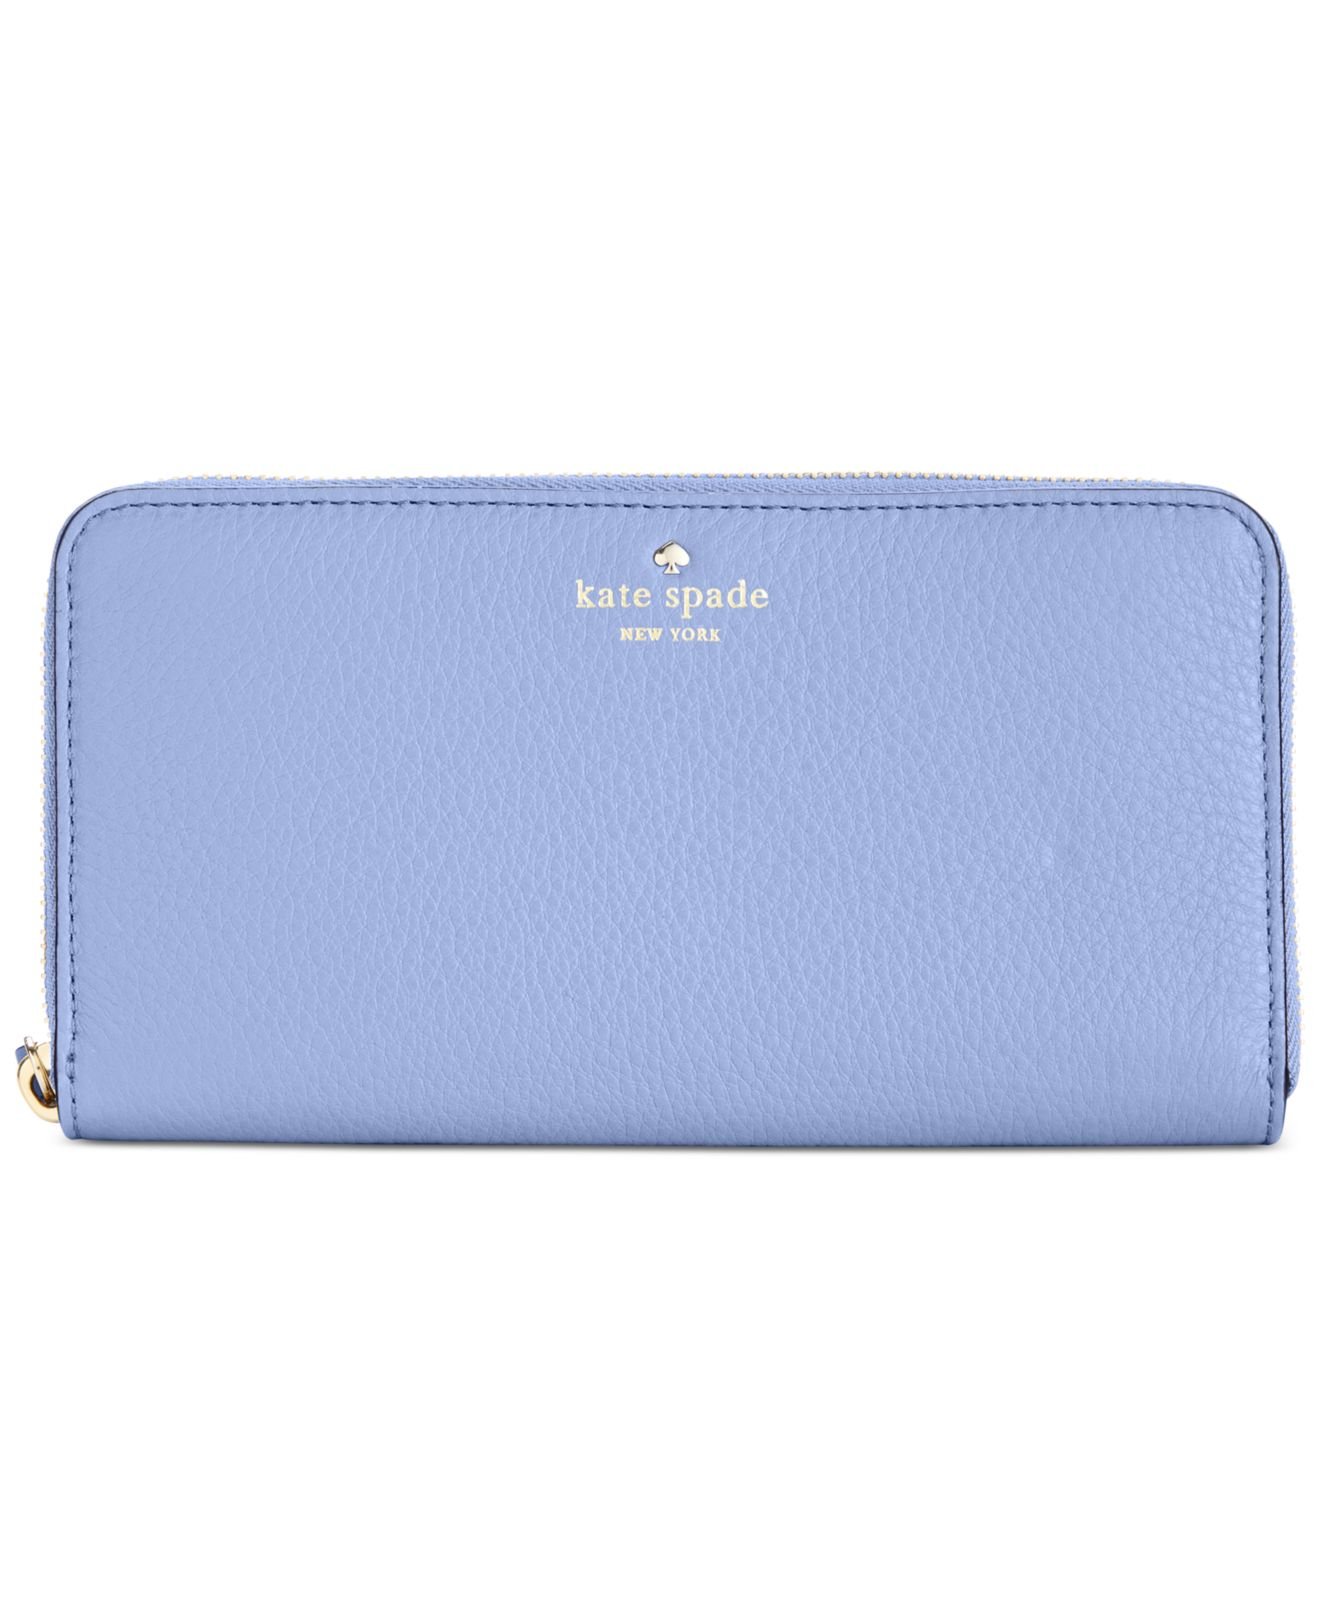 Lyst - Kate Spade New York Cobble Hill Lacey Wallet in Blue